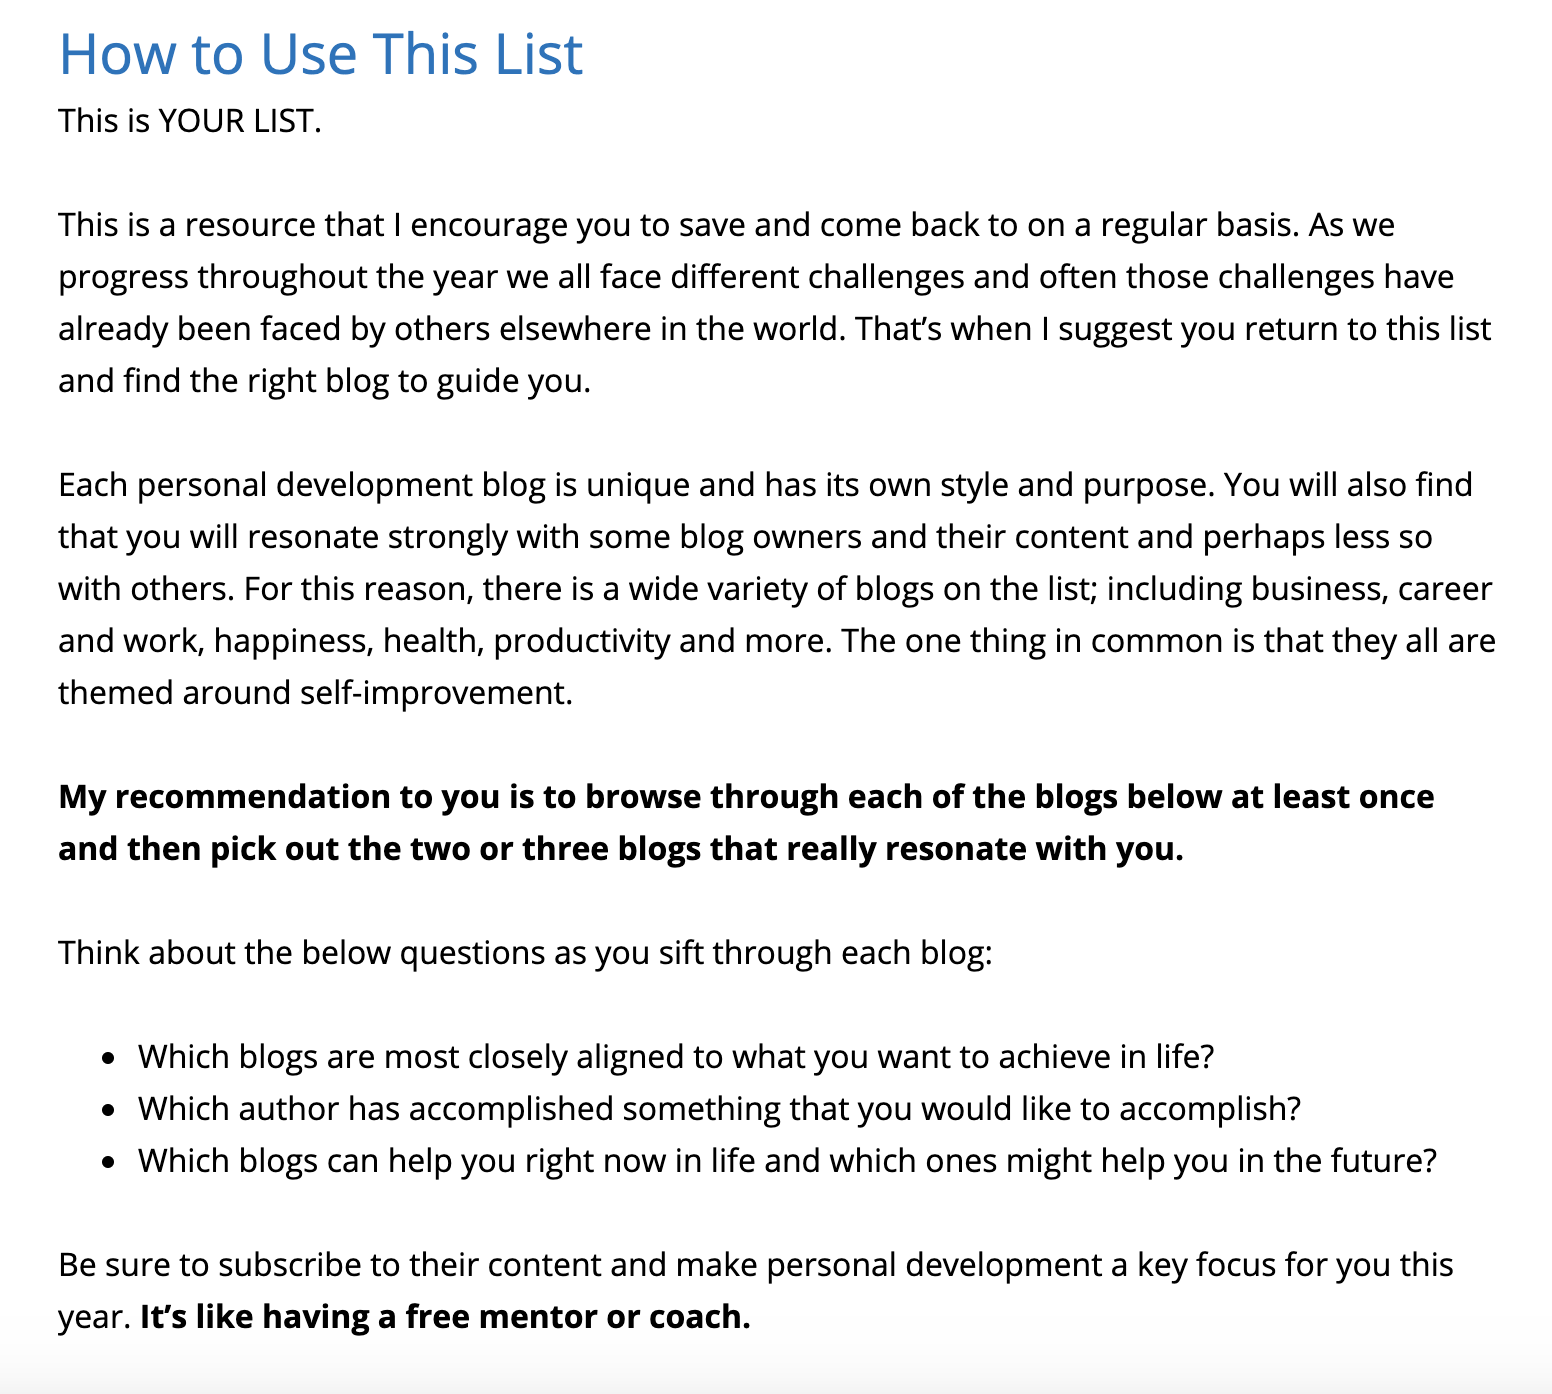 introduction to personal development blogs list